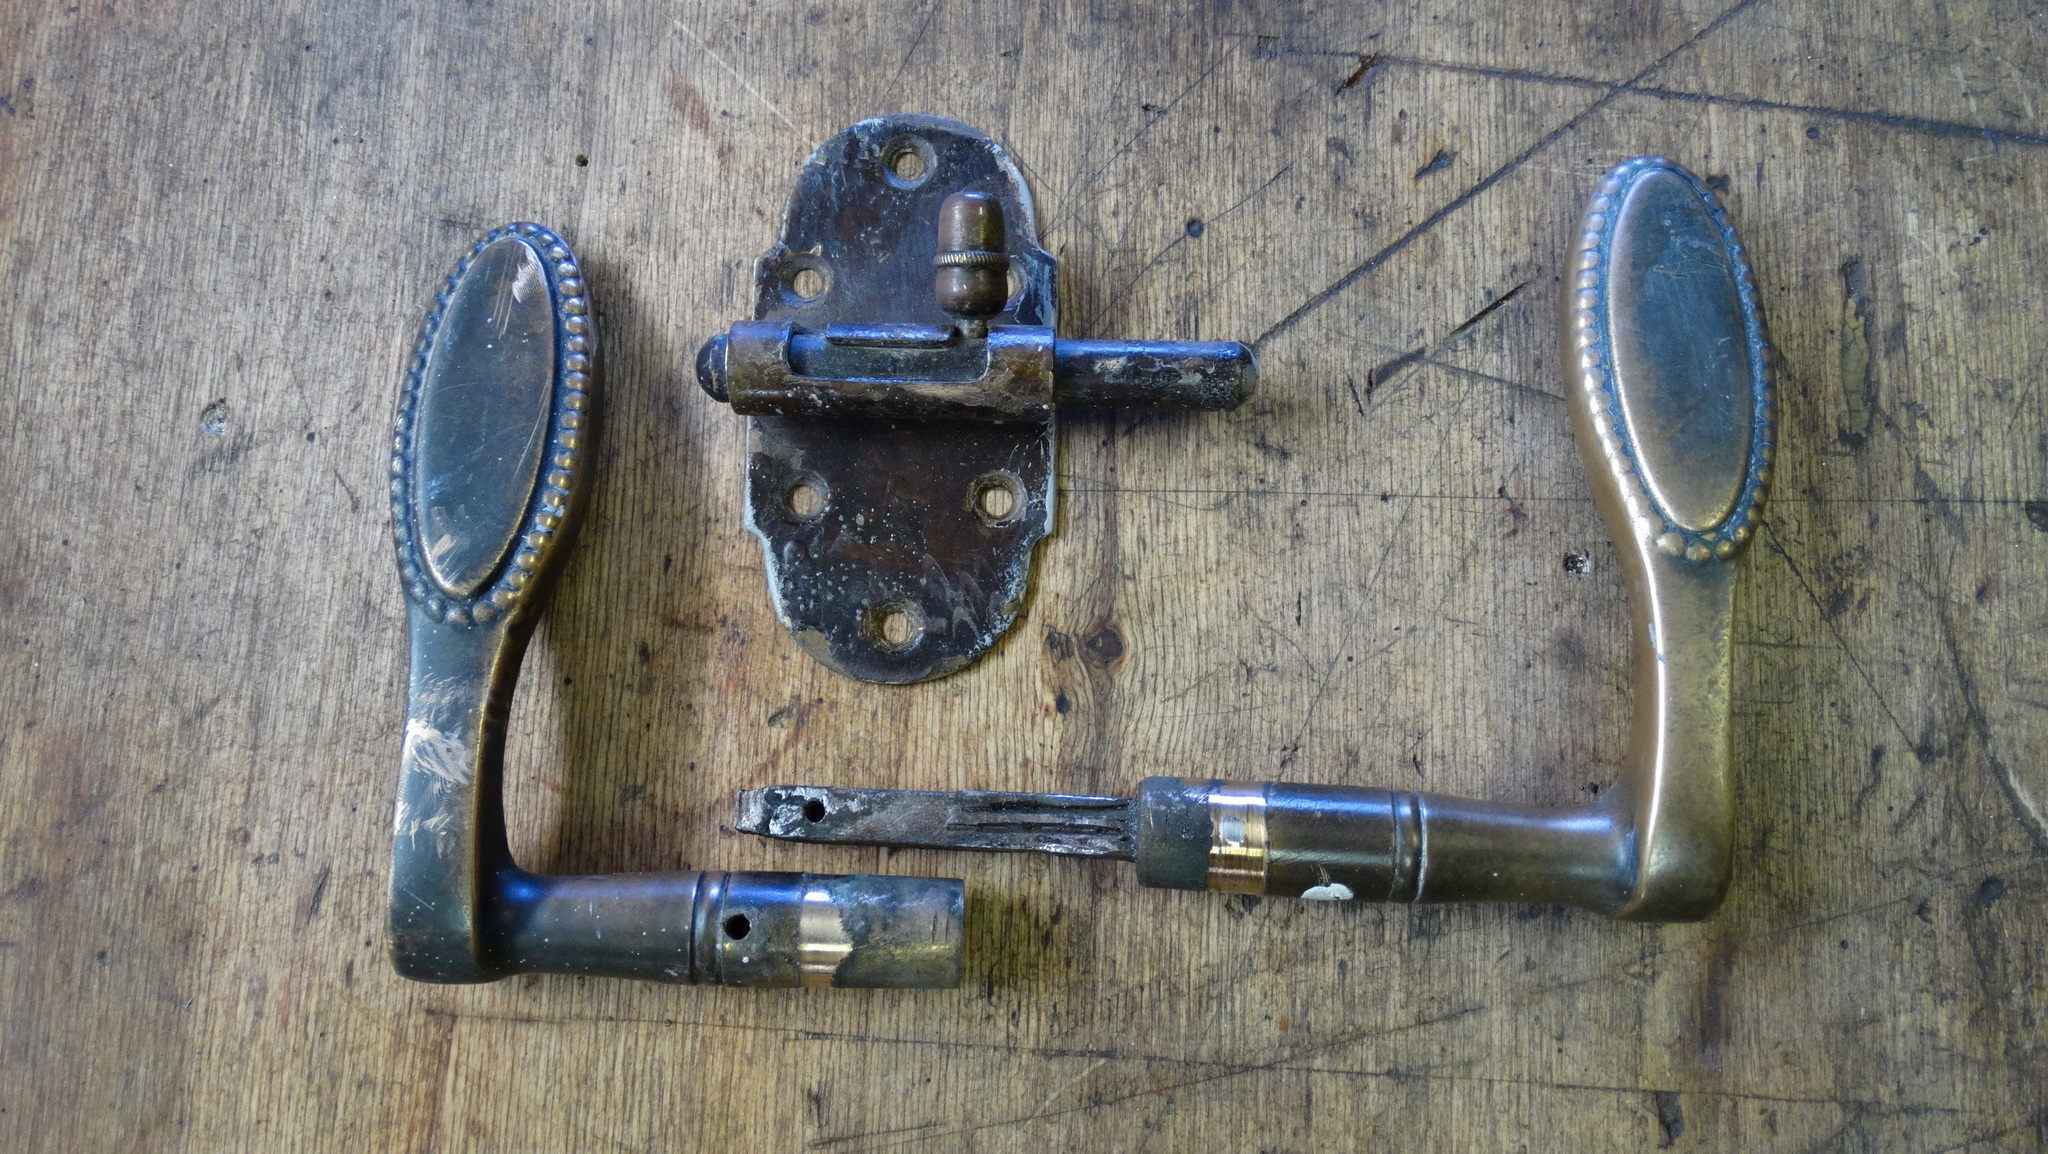 Restoring an old door lock. 150 years old - My, 150 years, Recovery, Restoration, Lock, Bronze, Patina, Old man, Video, Longpost, Needlework with process